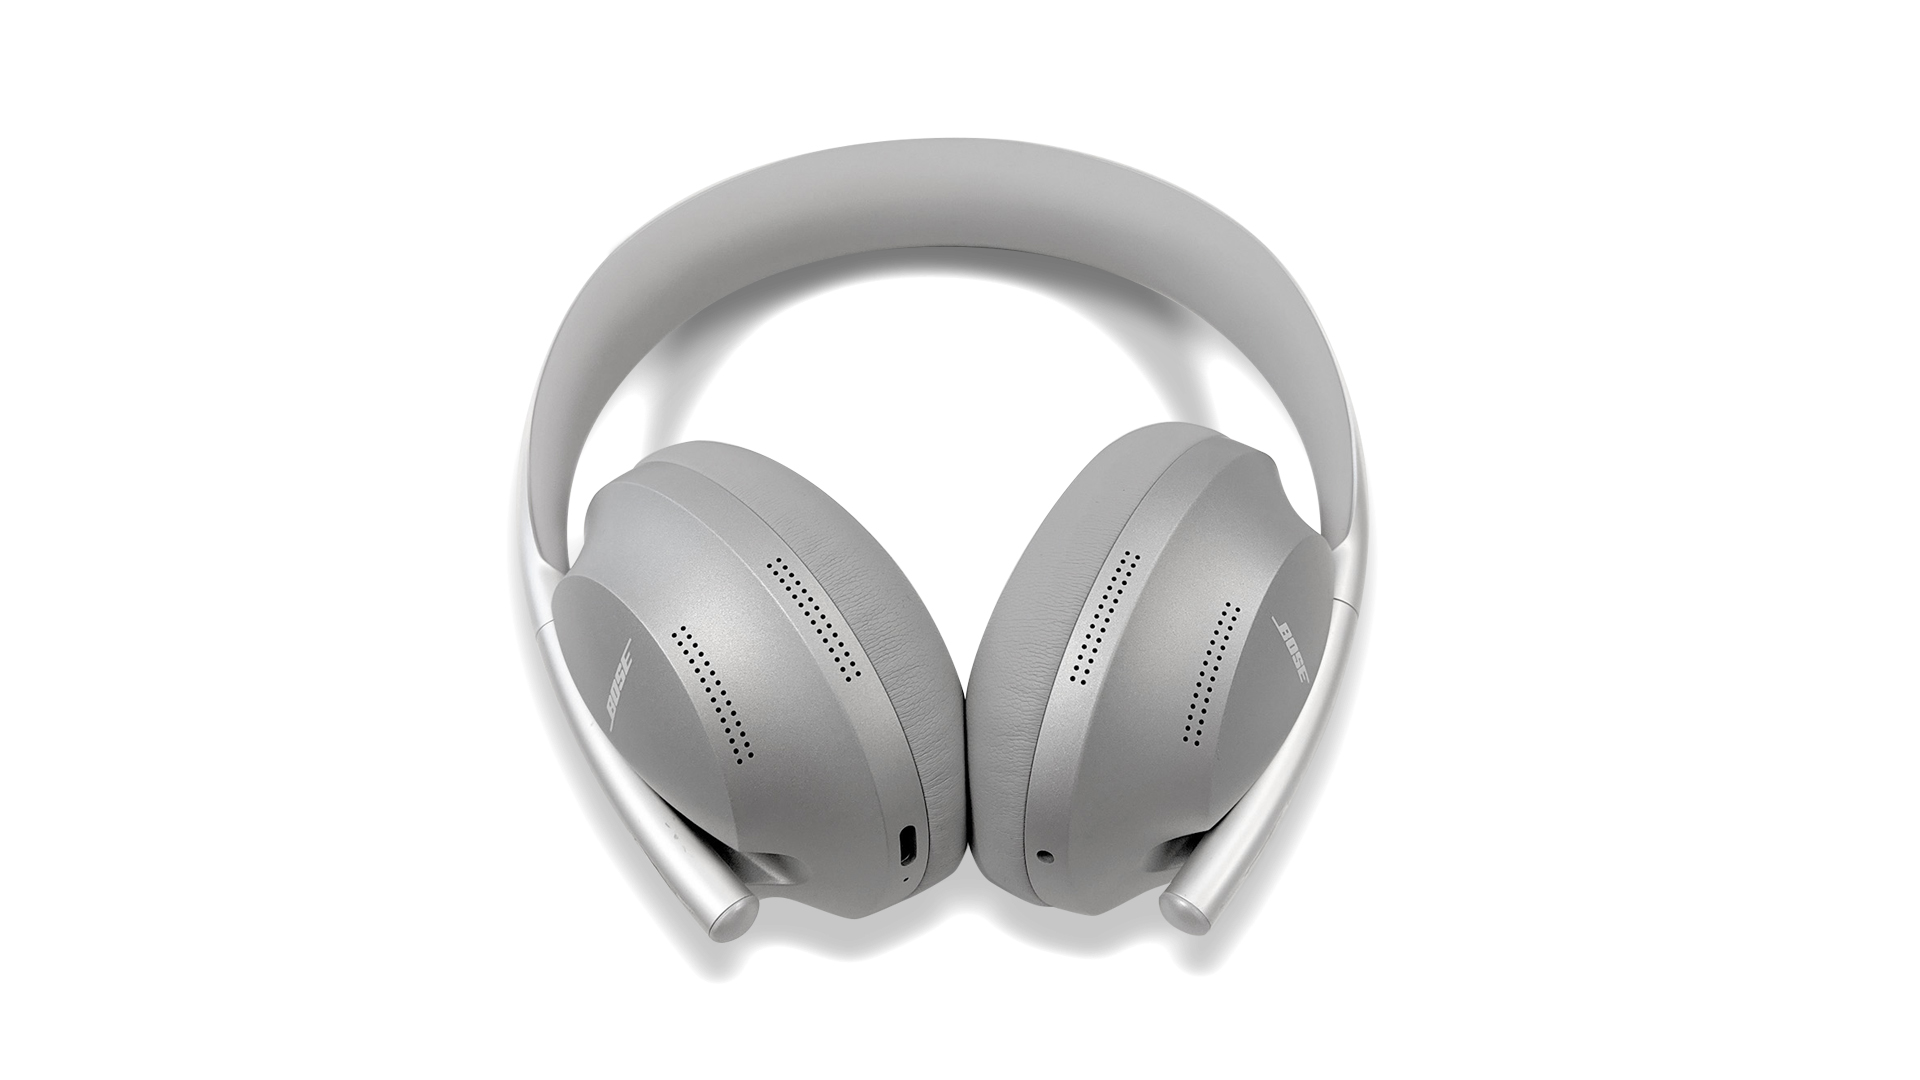 Bose 700 noise canceling headphones in silver on a white background.